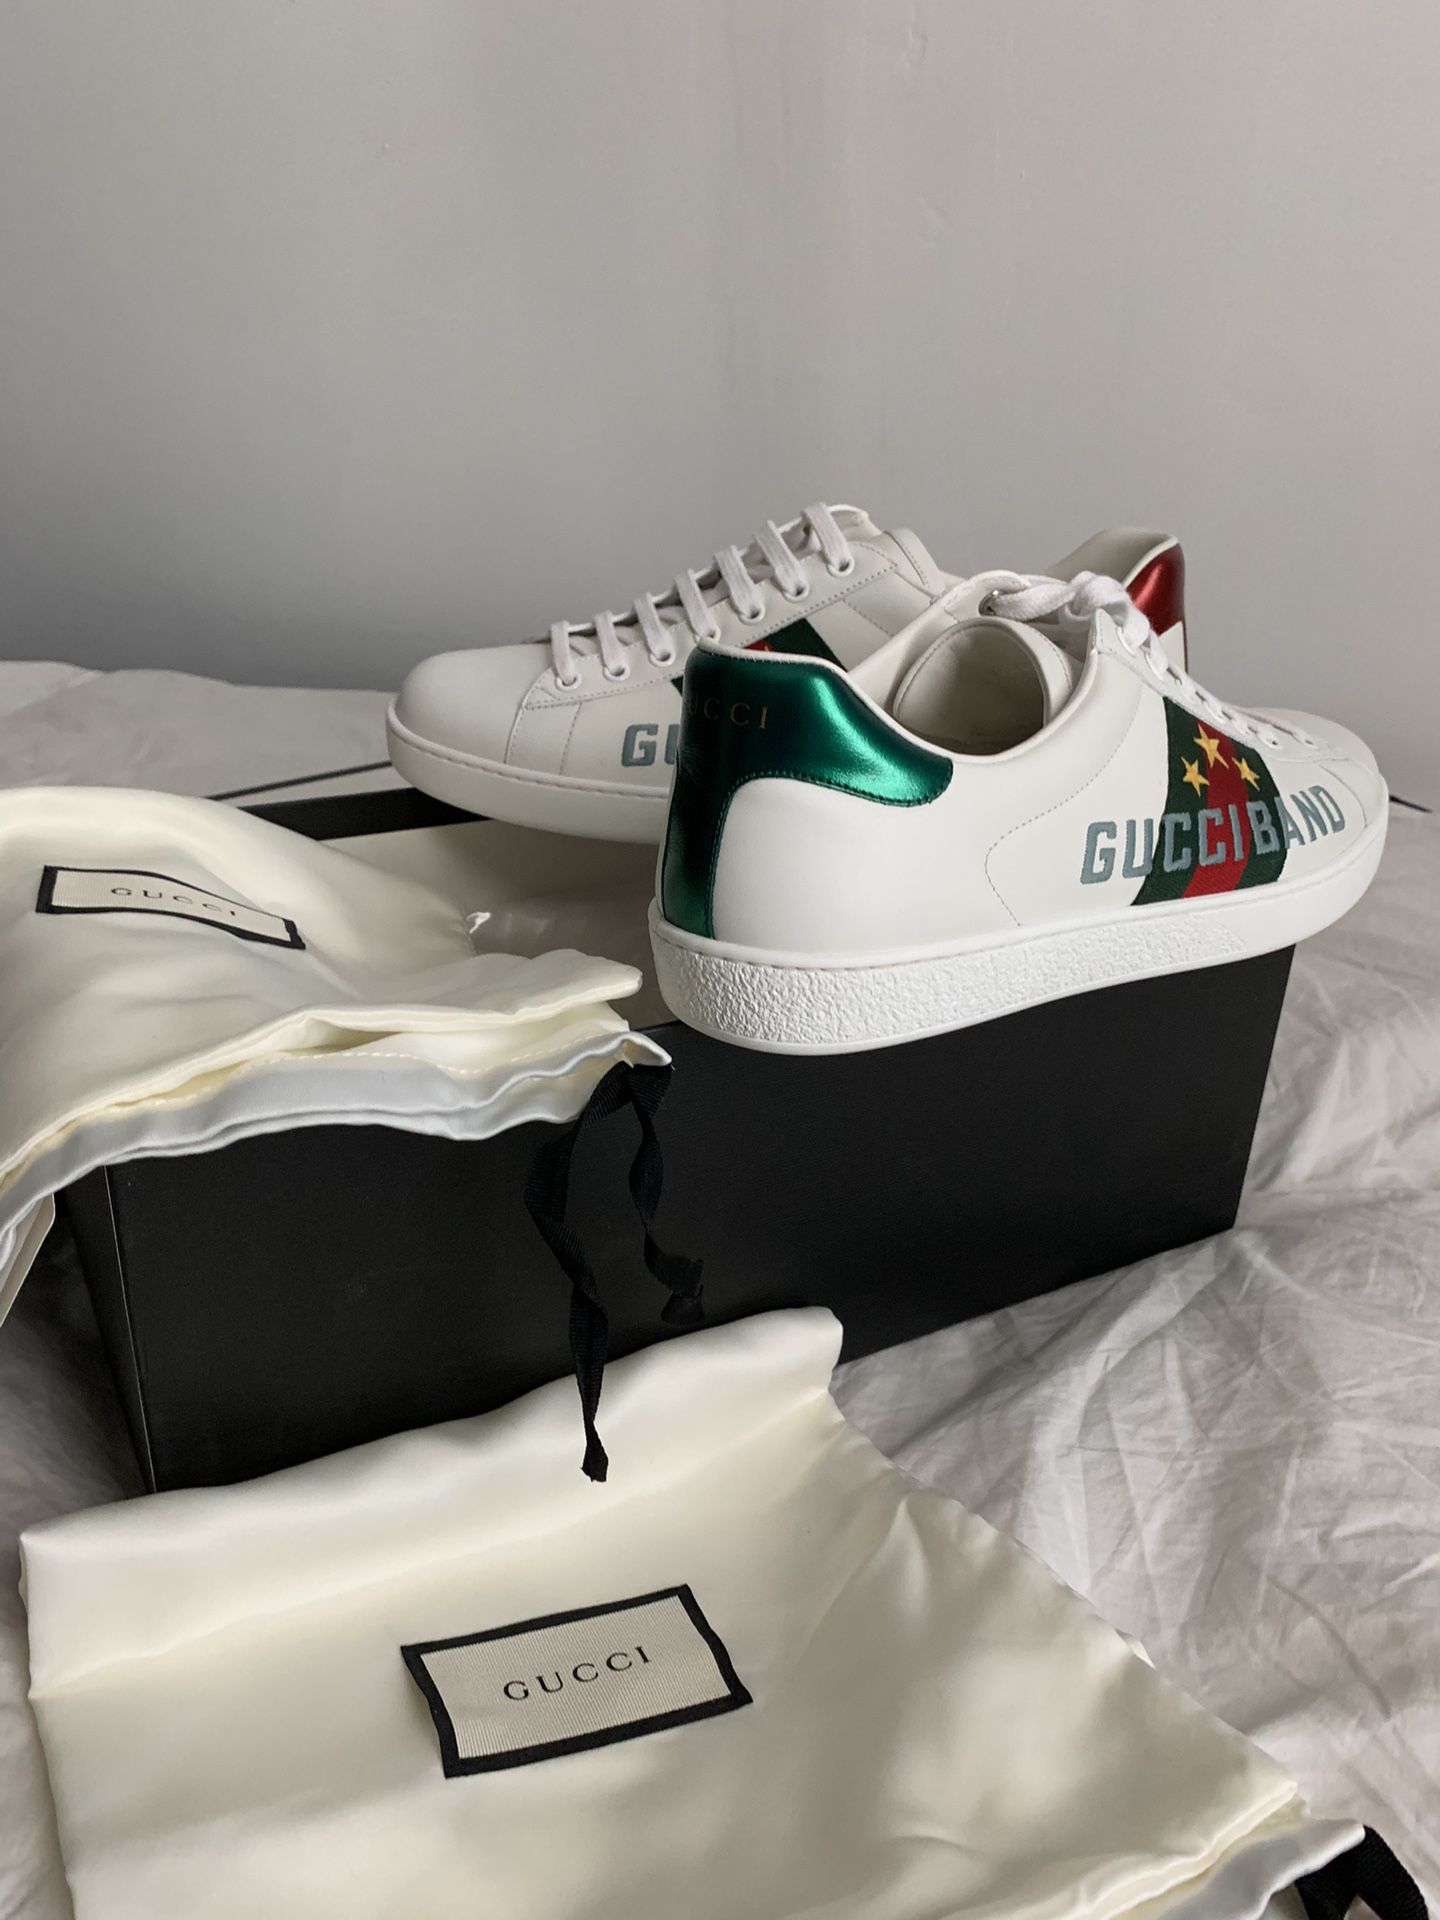 Plys dukke komplikationer Fakultet New Authentic Gucci Ace Band Shoes (Size is 8.5 But Can Fit Up To A 9.5)  for Sale in Schertz, TX - OfferUp